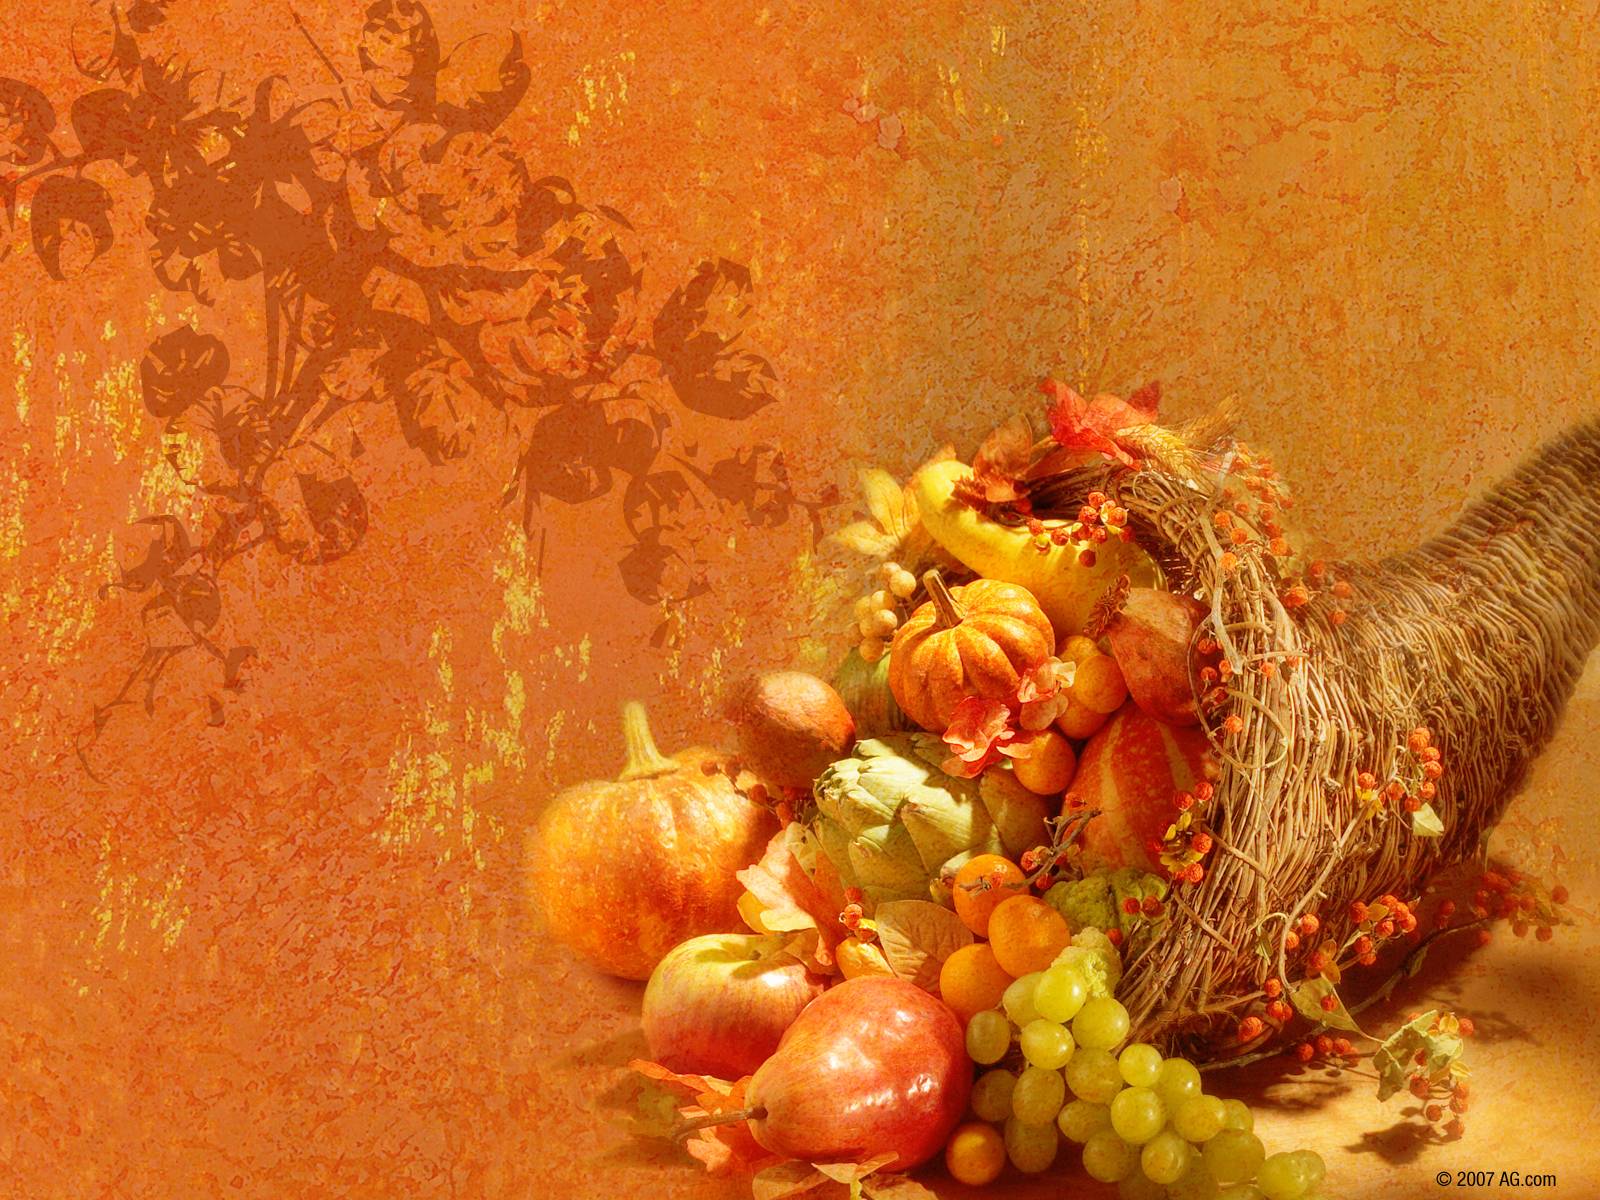 Free Thanksgiving Computer Wallpaper Backgrounds